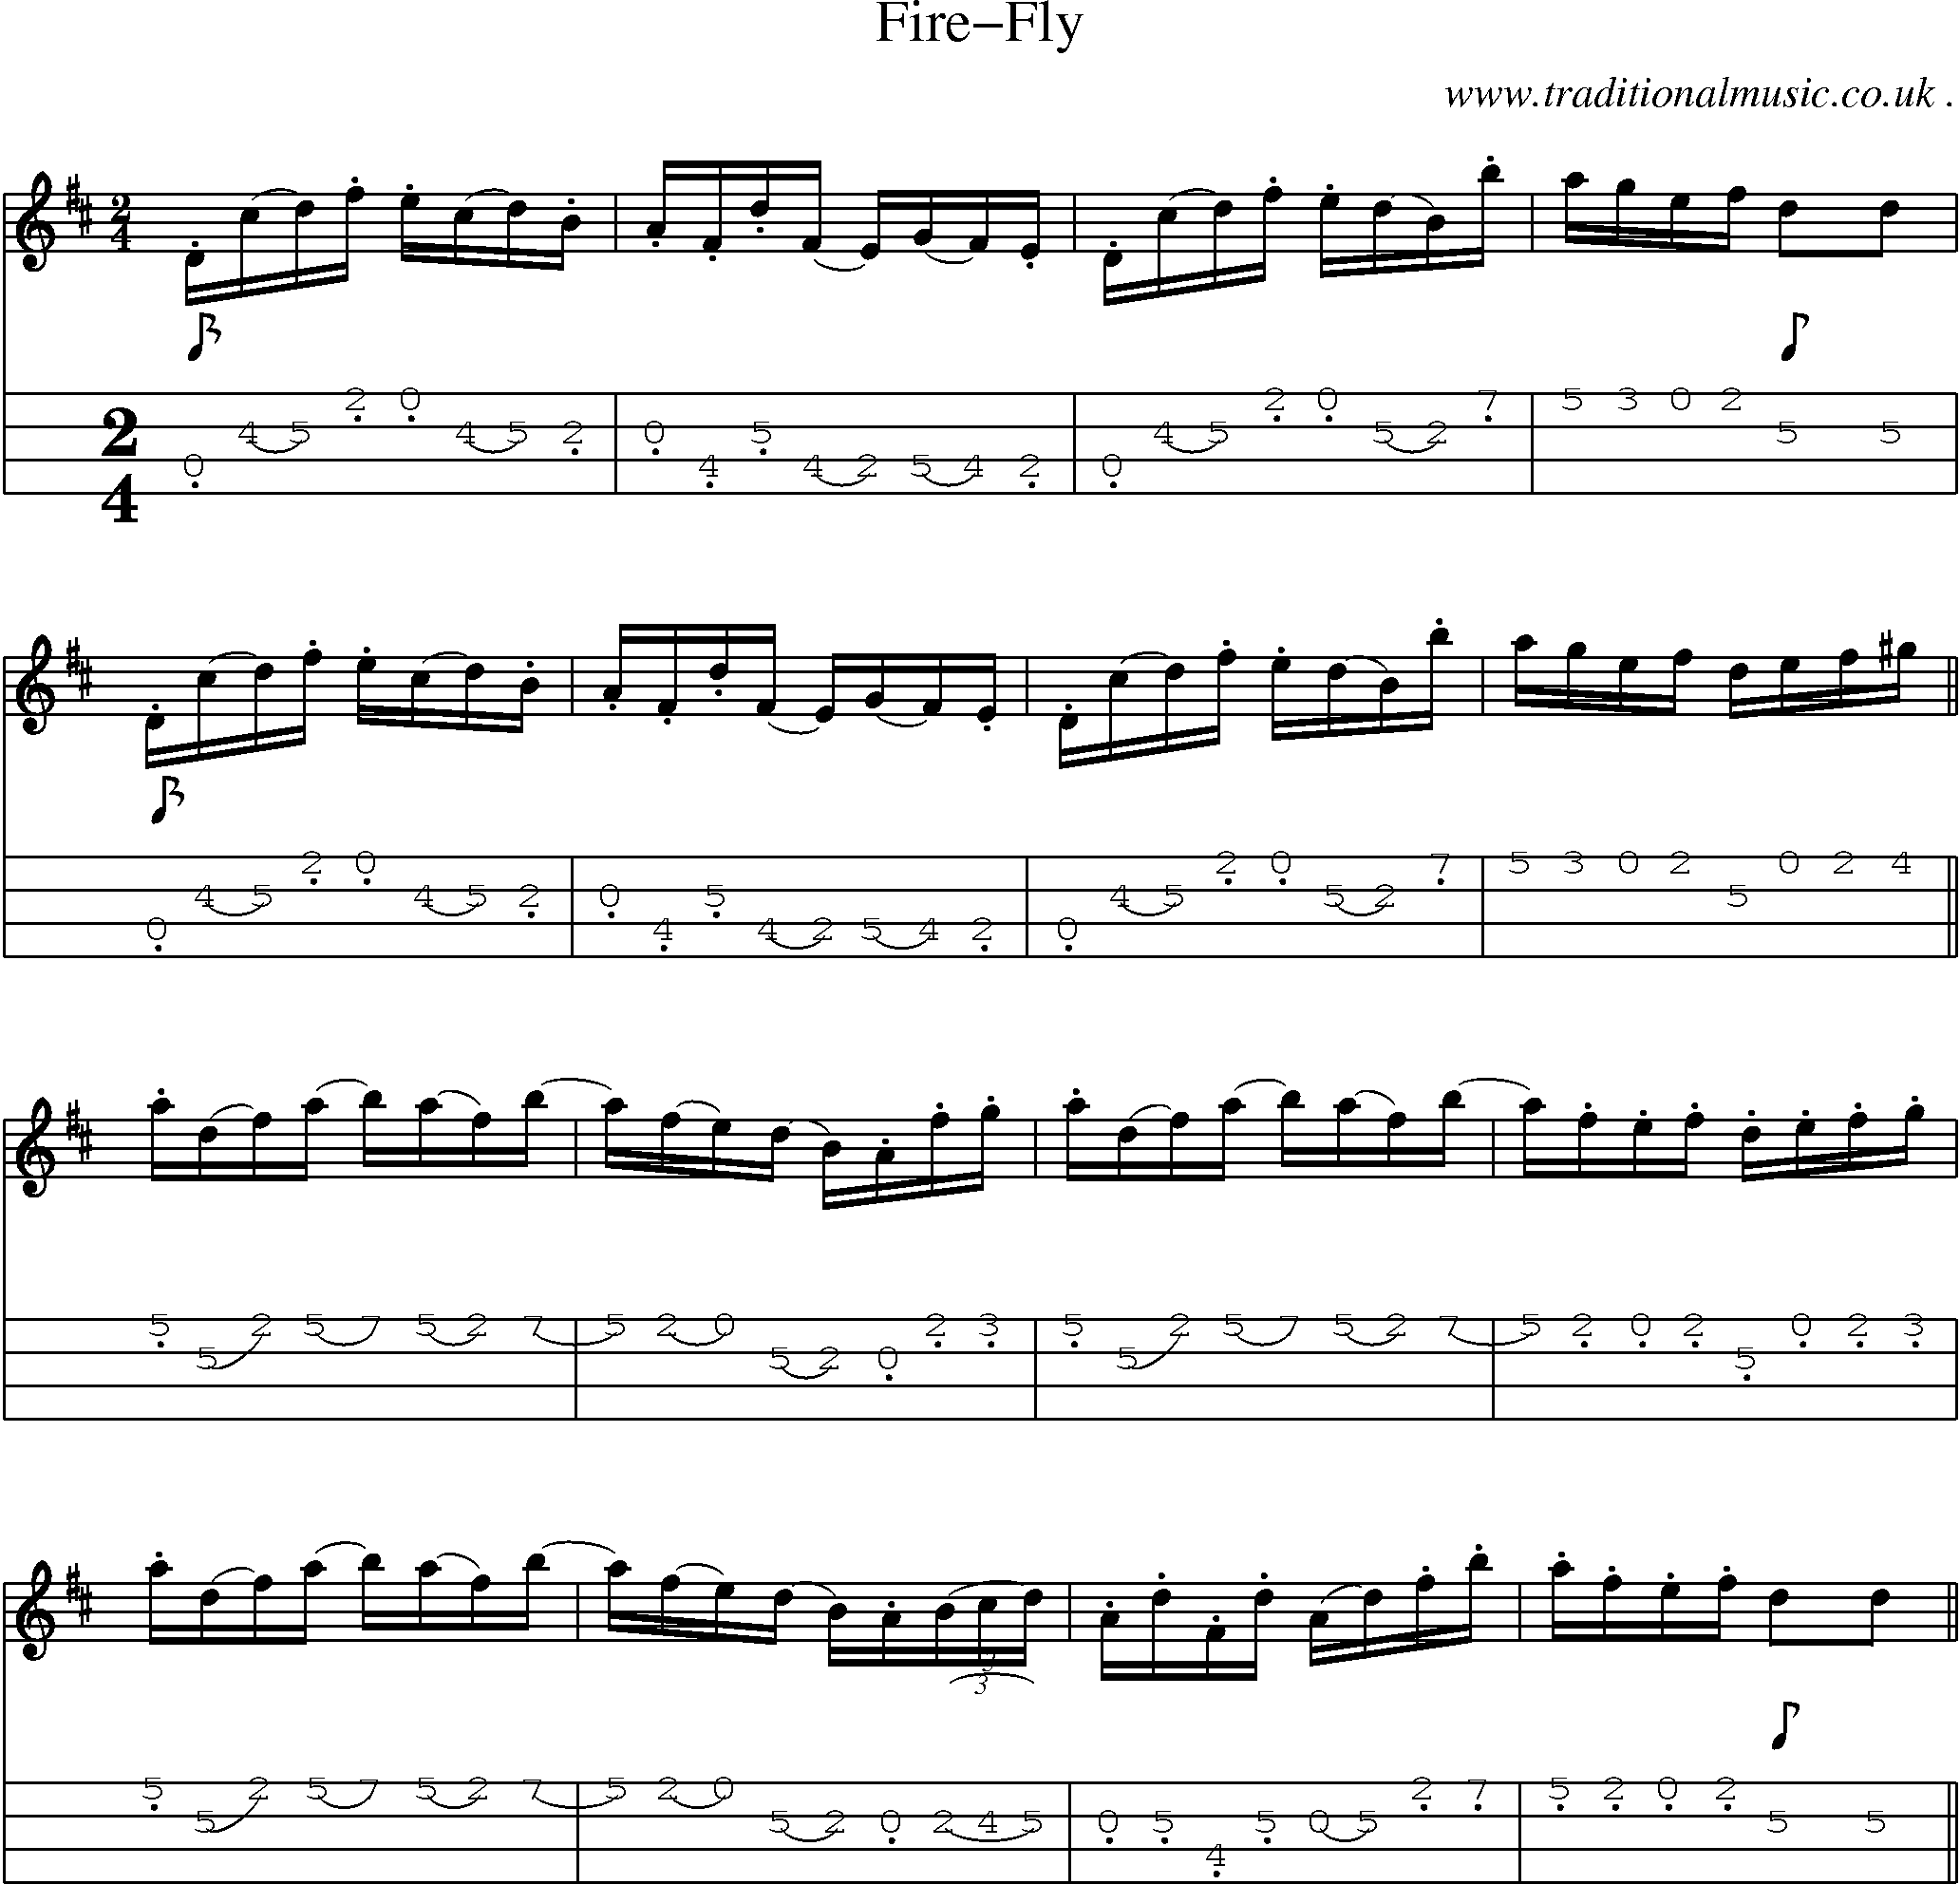 Sheet-Music and Mandolin Tabs for Fire-fly